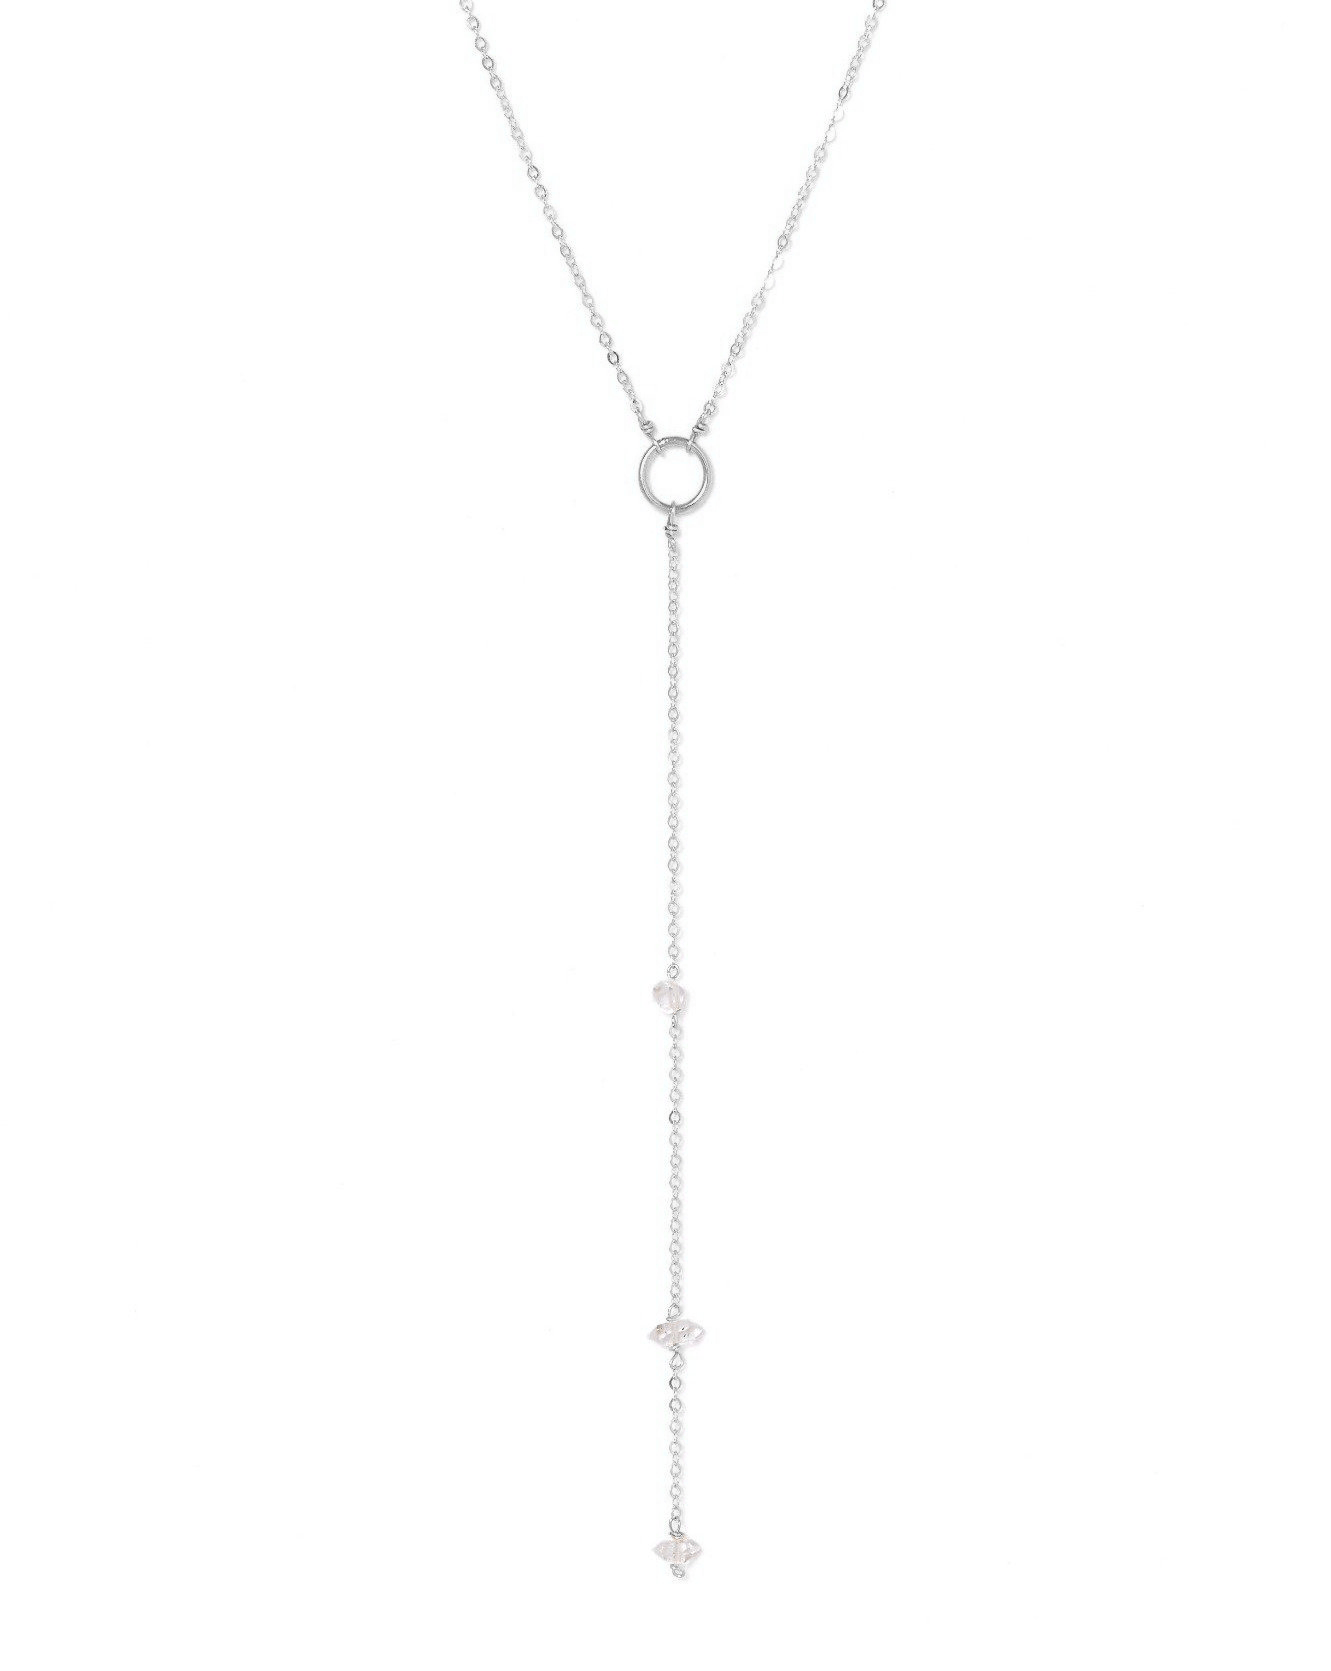 Chatoyant Herkimer Necklace by KOZAKH. A 16 to 18 inch adjustable length, 3 inch drop lariat style necklace in Sterling Silver, featuring Herkimer Diamonds.